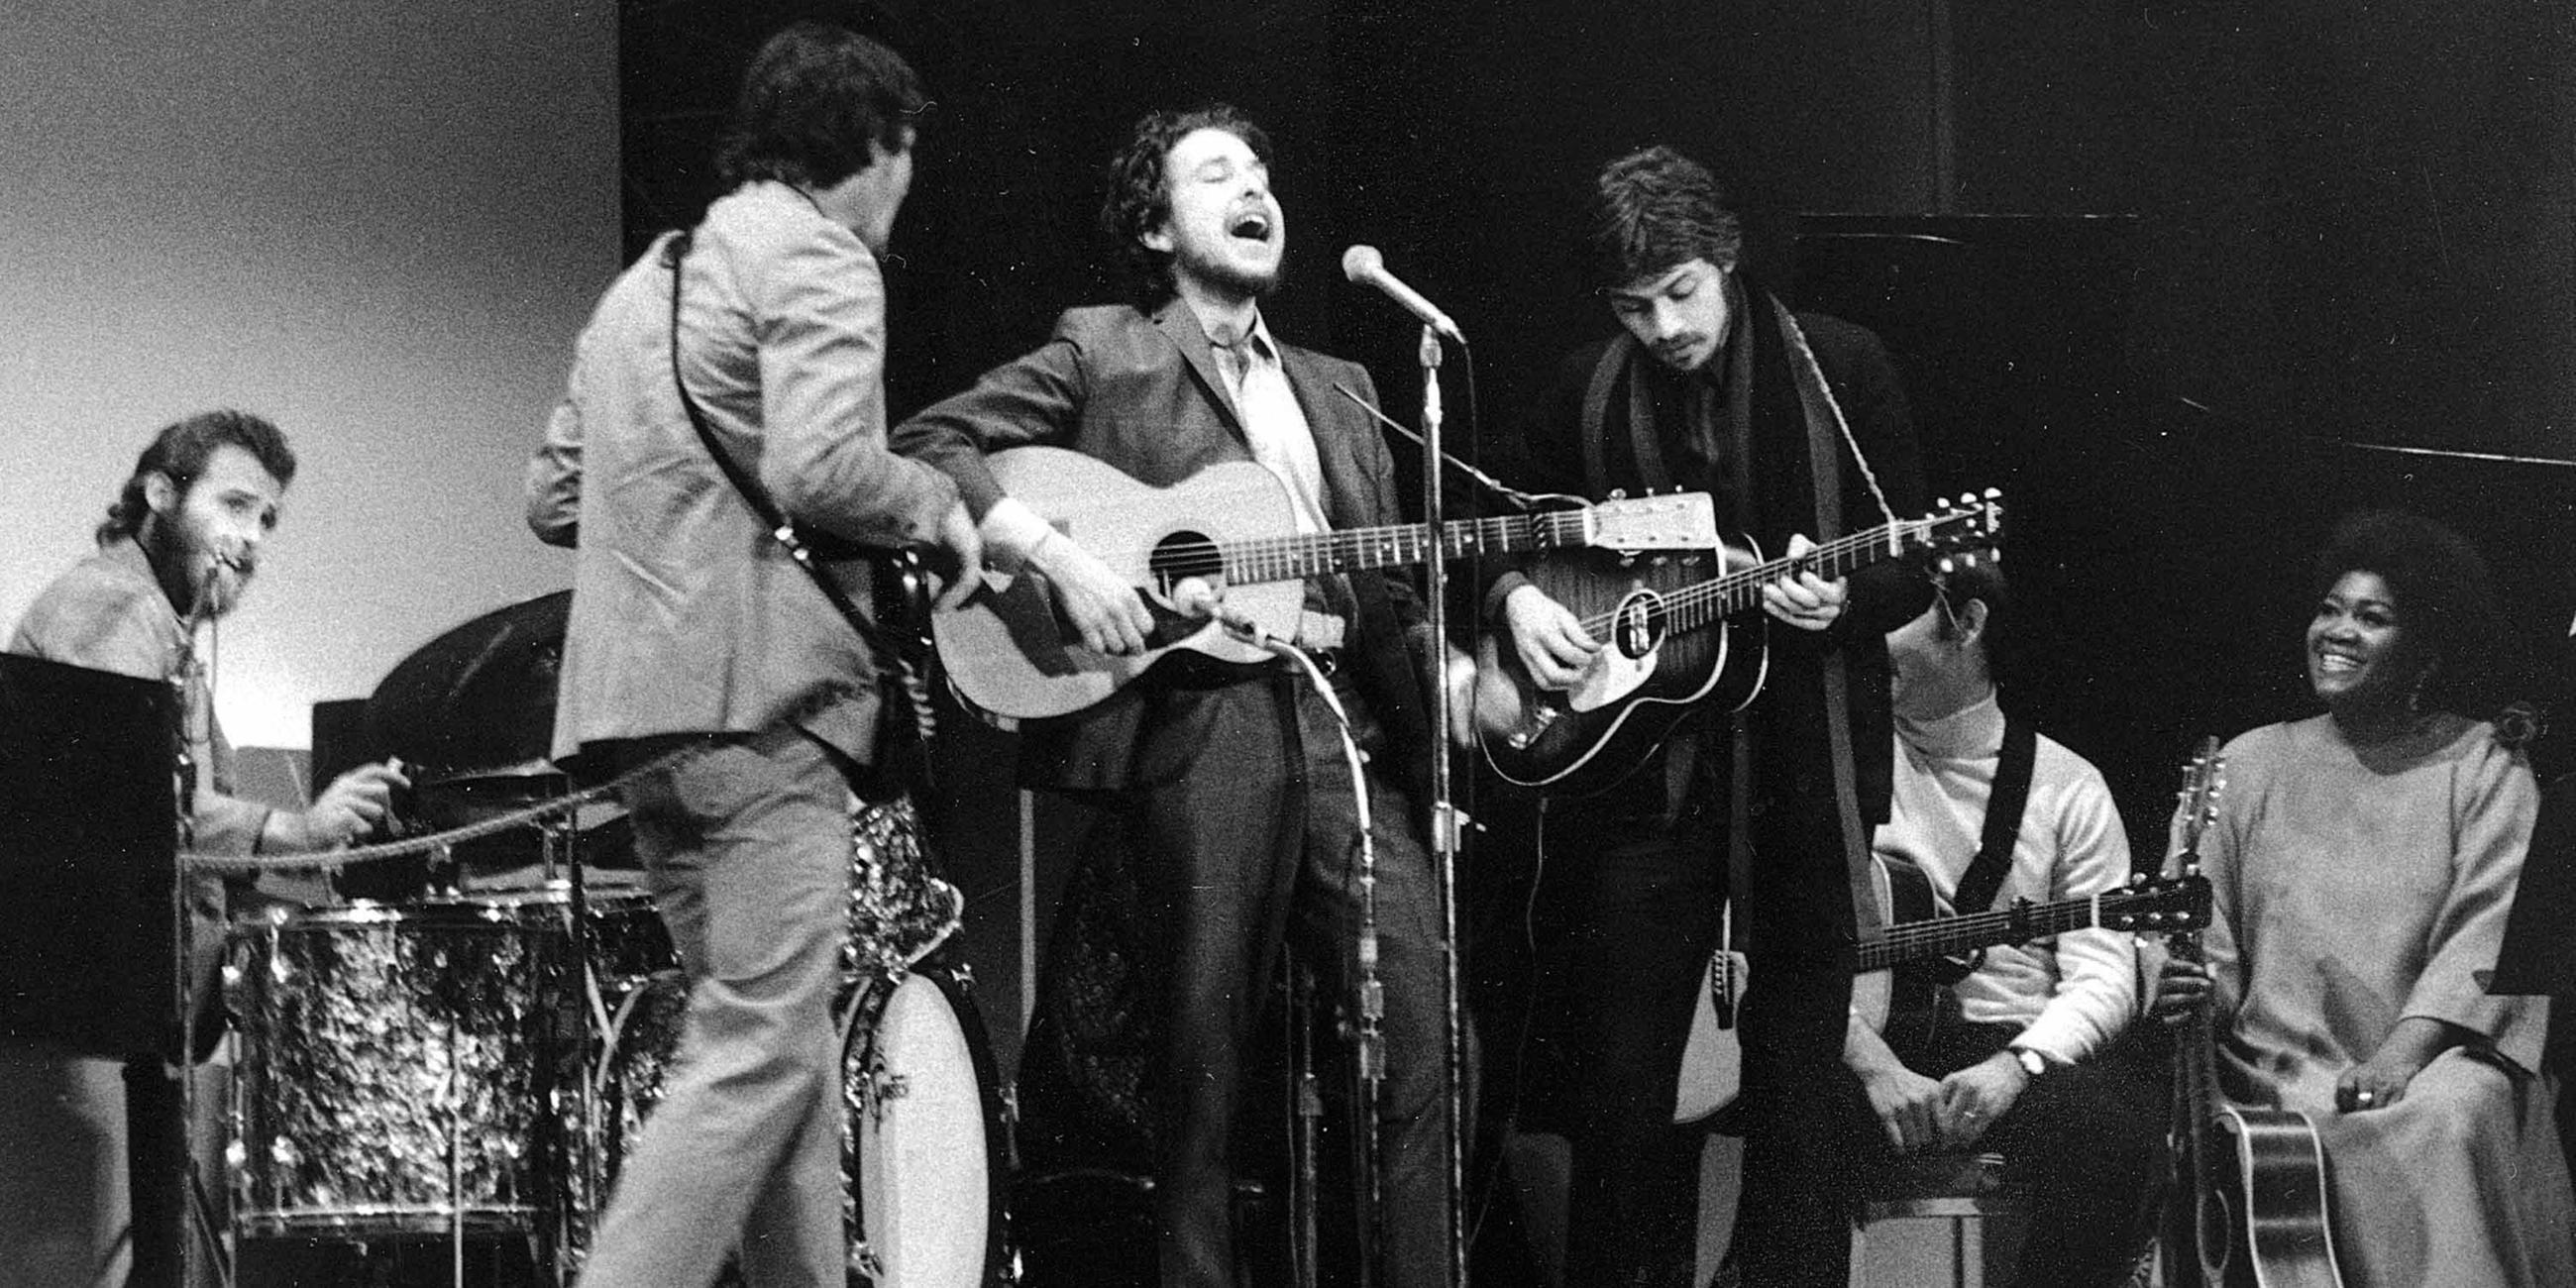 Bob Dylan mit seiner Band "The Band" - 1968 in New York (USA)